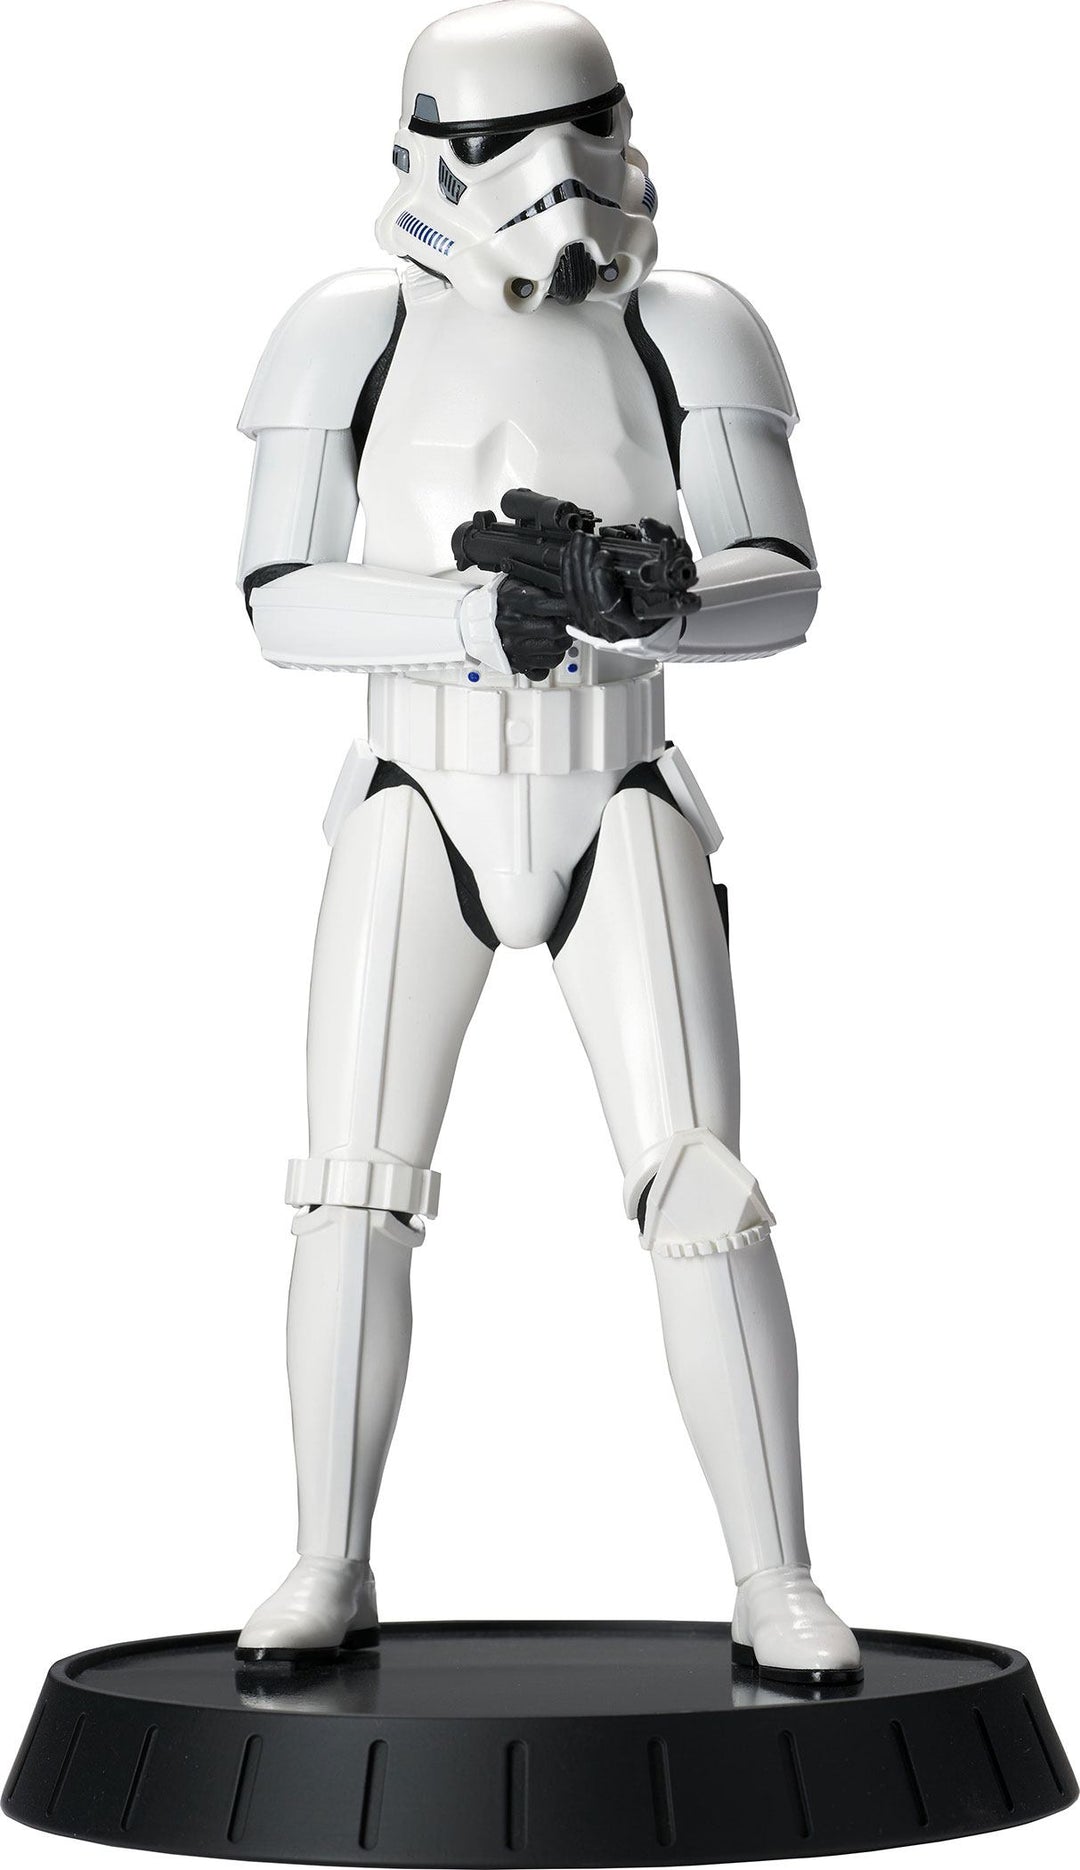 Gentle Giant Star Wars A New Hope Milestones Limited Edition 1/6 Scale Statue Stormtrooper - Infinity Collectables 